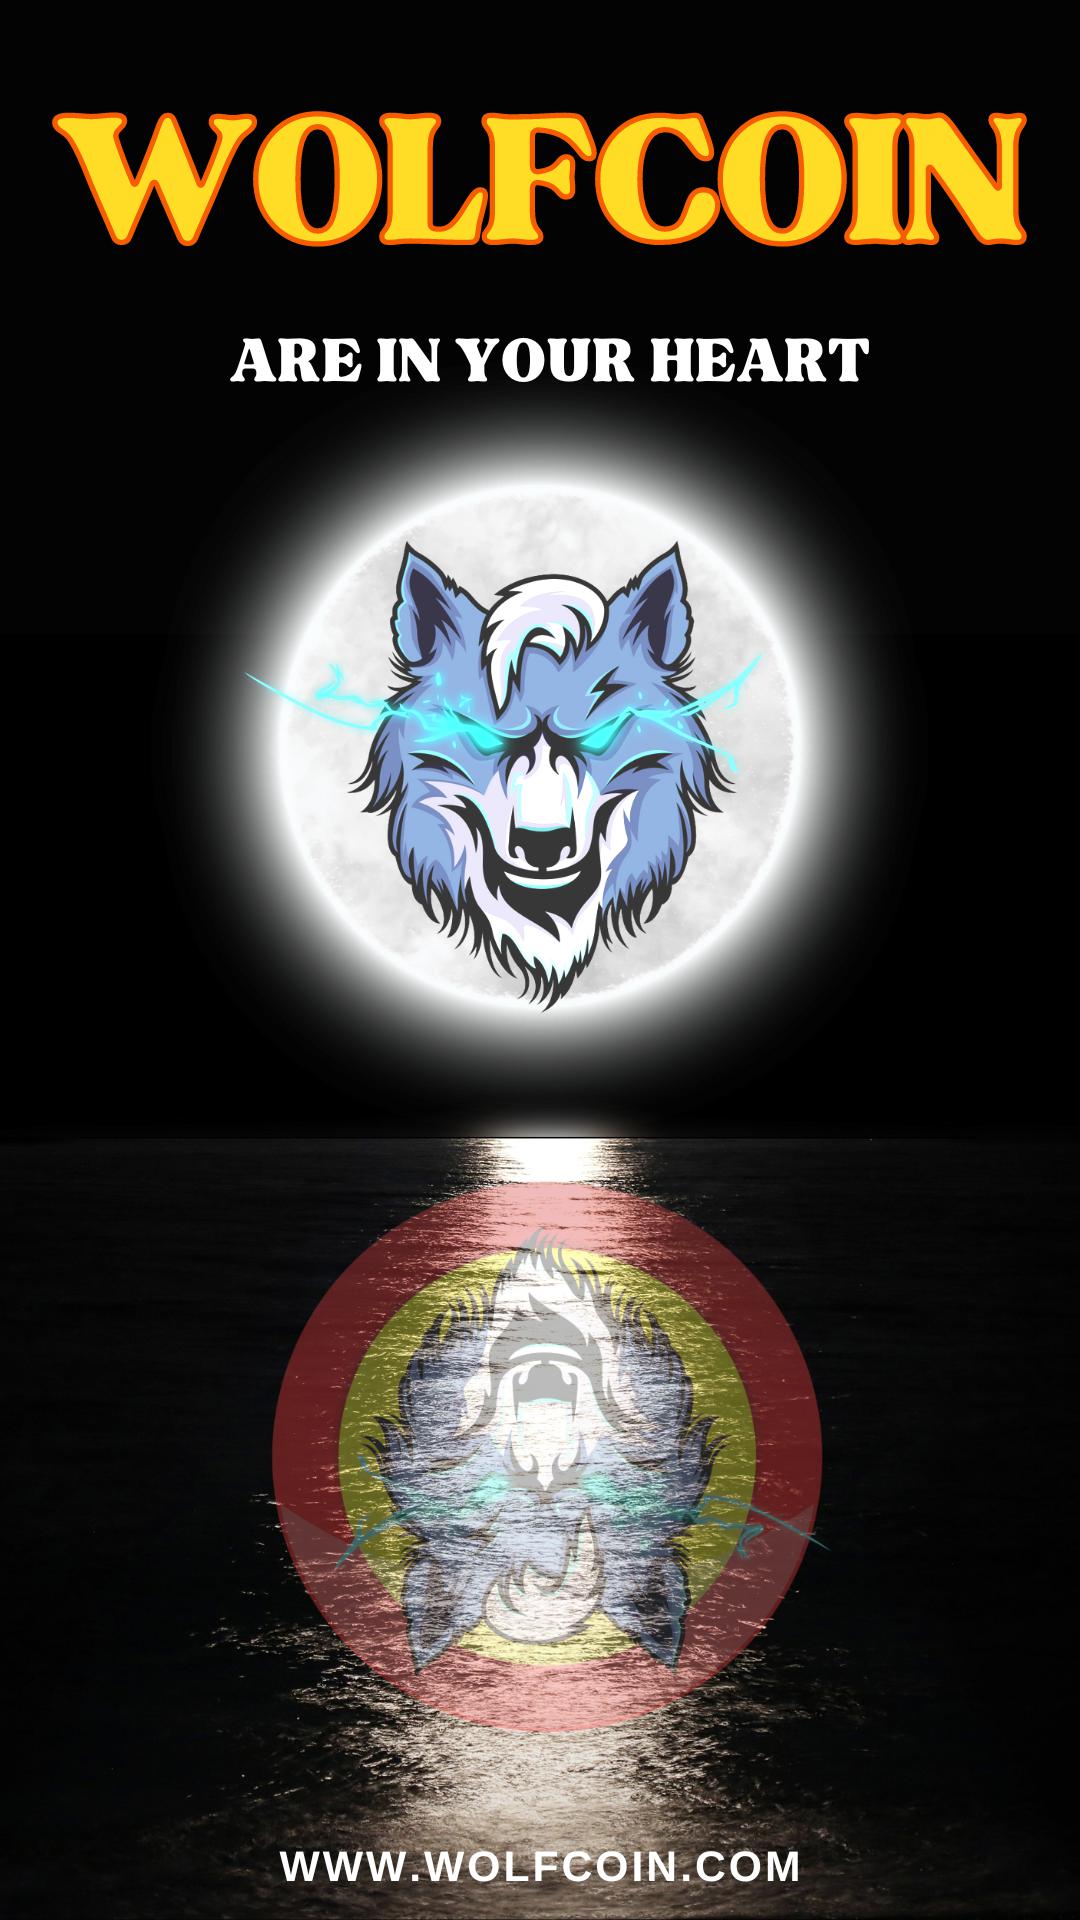 WOLFCOIN ARE IN YOUR HEART.png.jpg